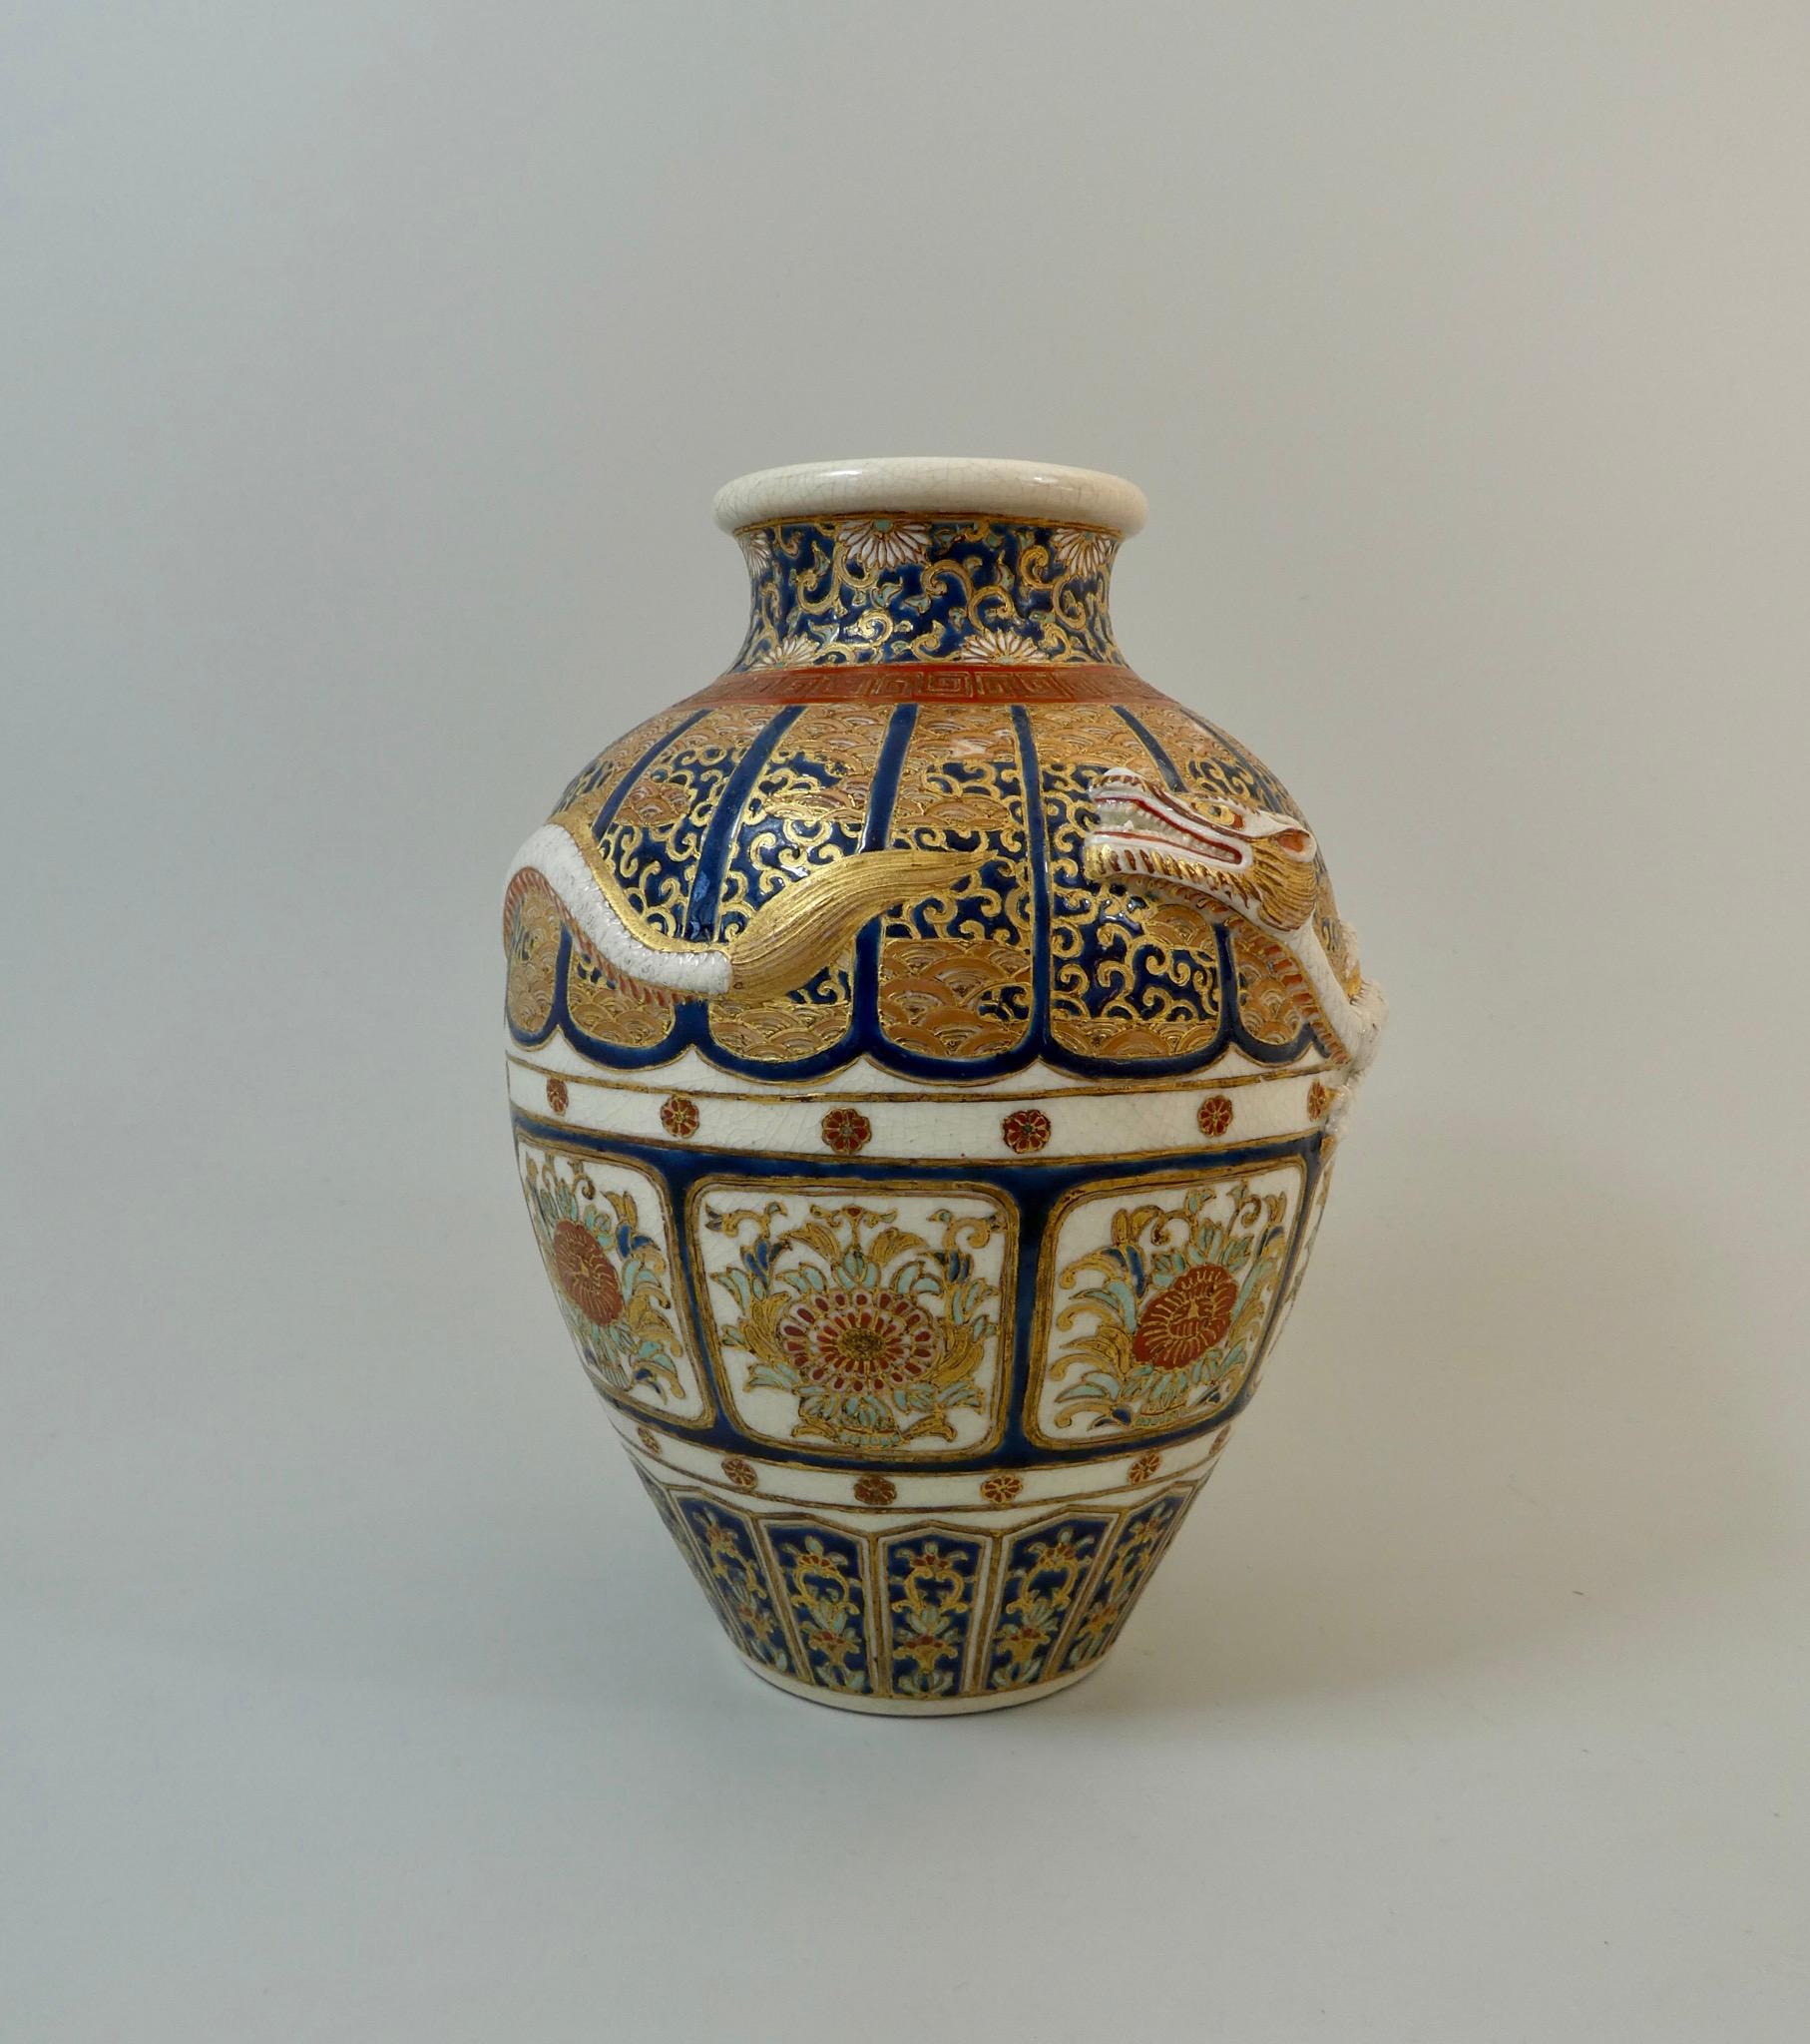 An Imperial Satsuma earthenware vase, circa 1870. Meiji Period. The baluster shaped vase, moulded with a dragon, flying over cobalt blue ground lappets, decorated with stylized waves, and scrollwork. Continuous panels containing stylized flowering